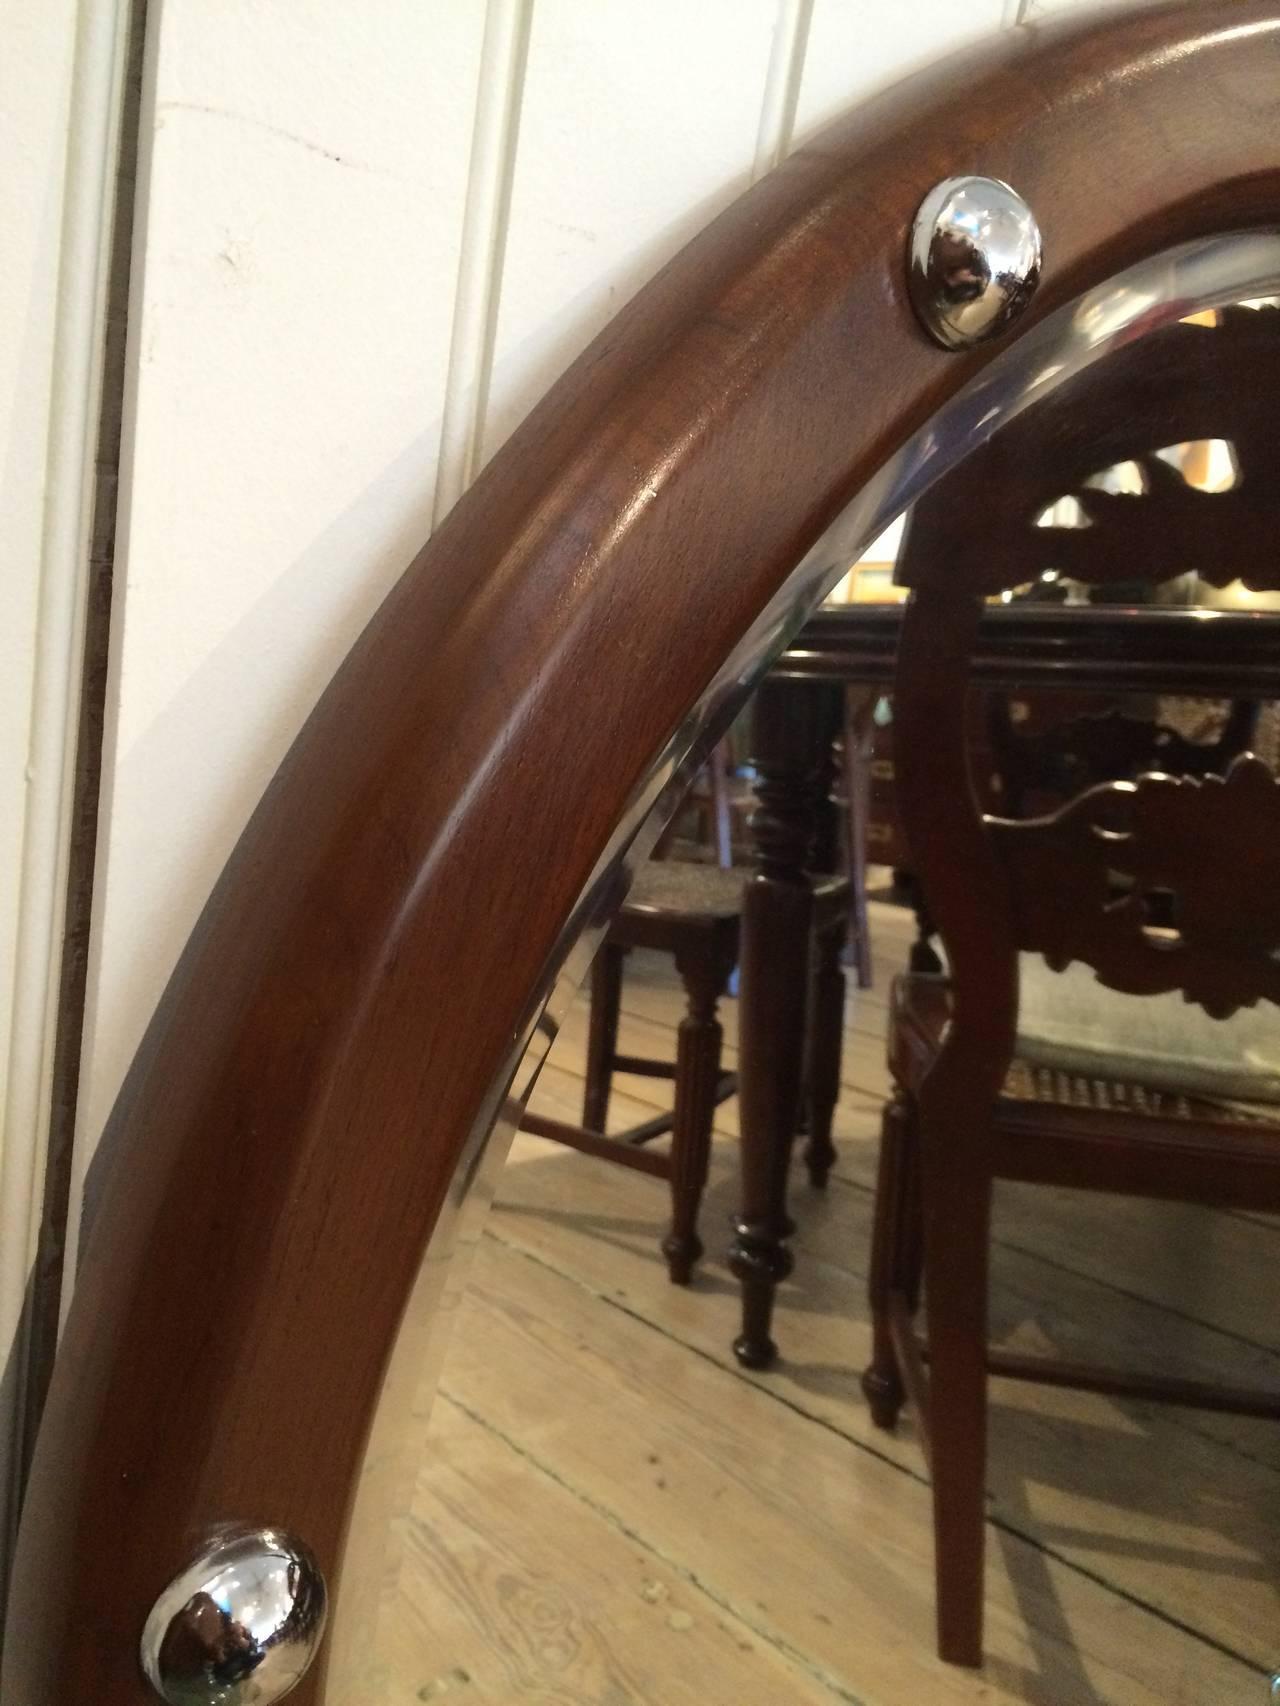 Large size ship's mirror made of teak with chrome rivets and beveled mirror. Great 3' diameter size. From a ship's stateroom. 

Nautical antiques located on Nantucket Island.